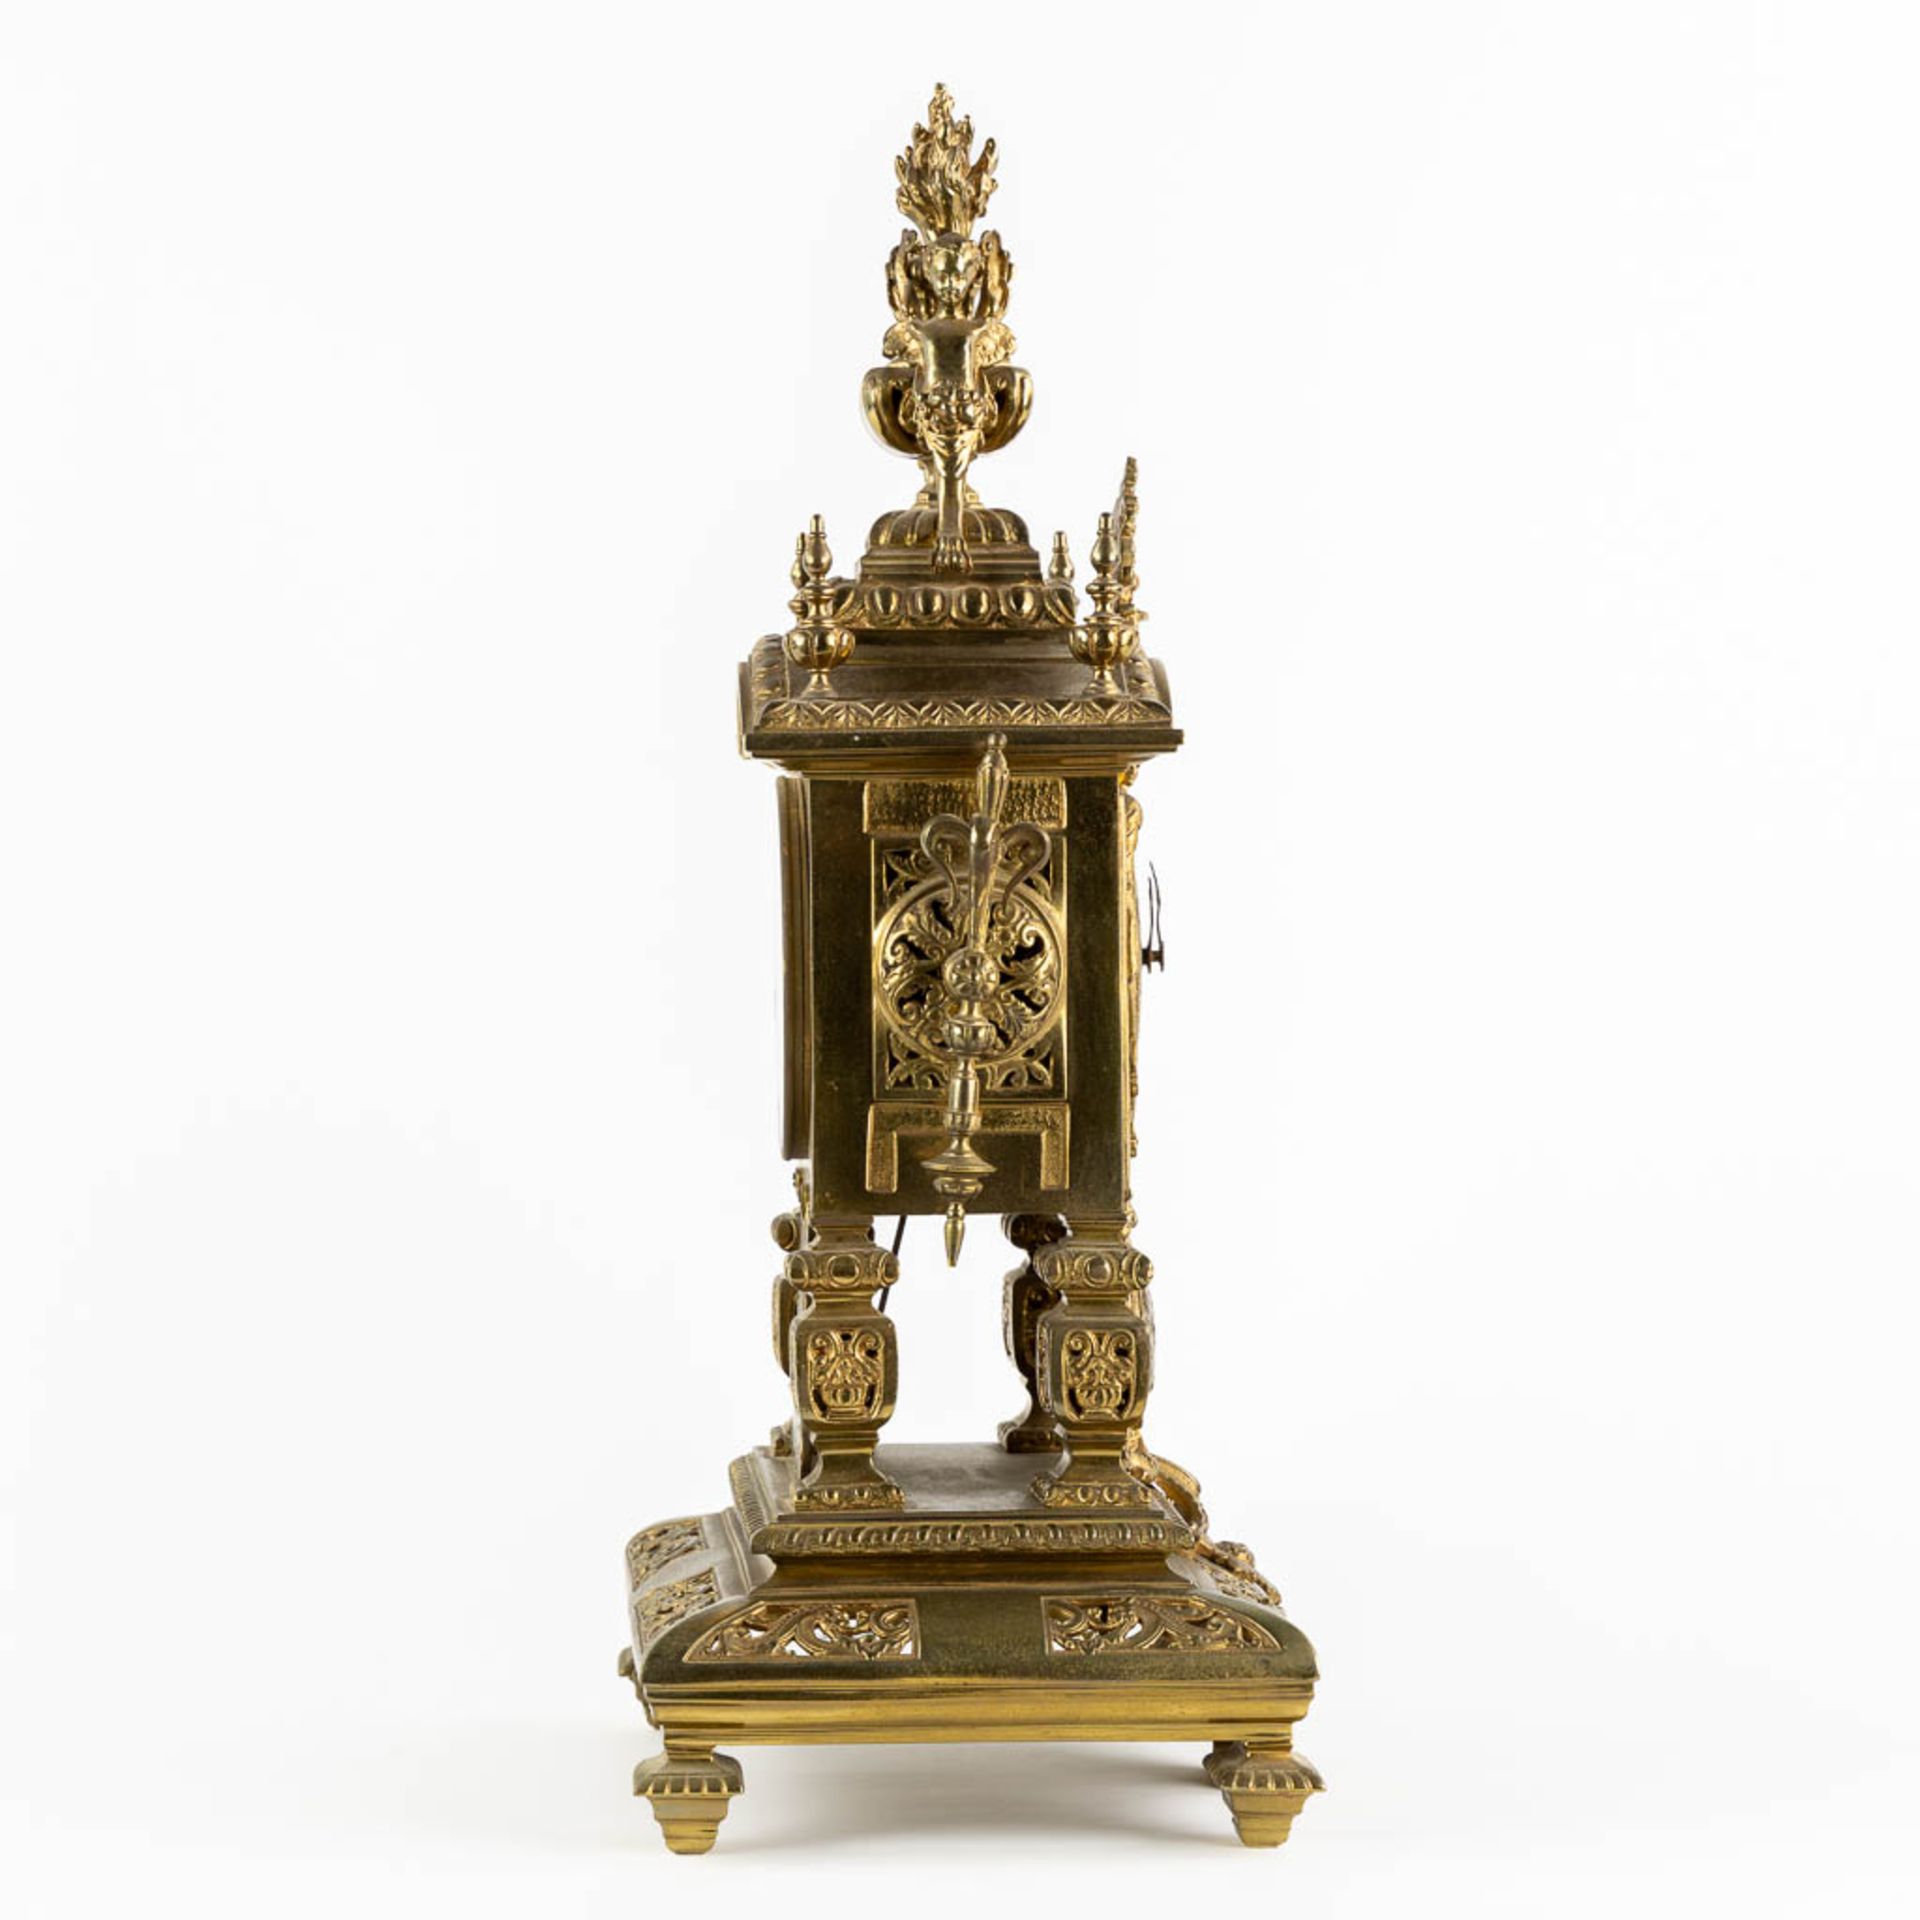 A mantle clock, bronze decorated with angels. Circa 1900. (L:21 x W:27 x H:54 cm) - Image 4 of 13